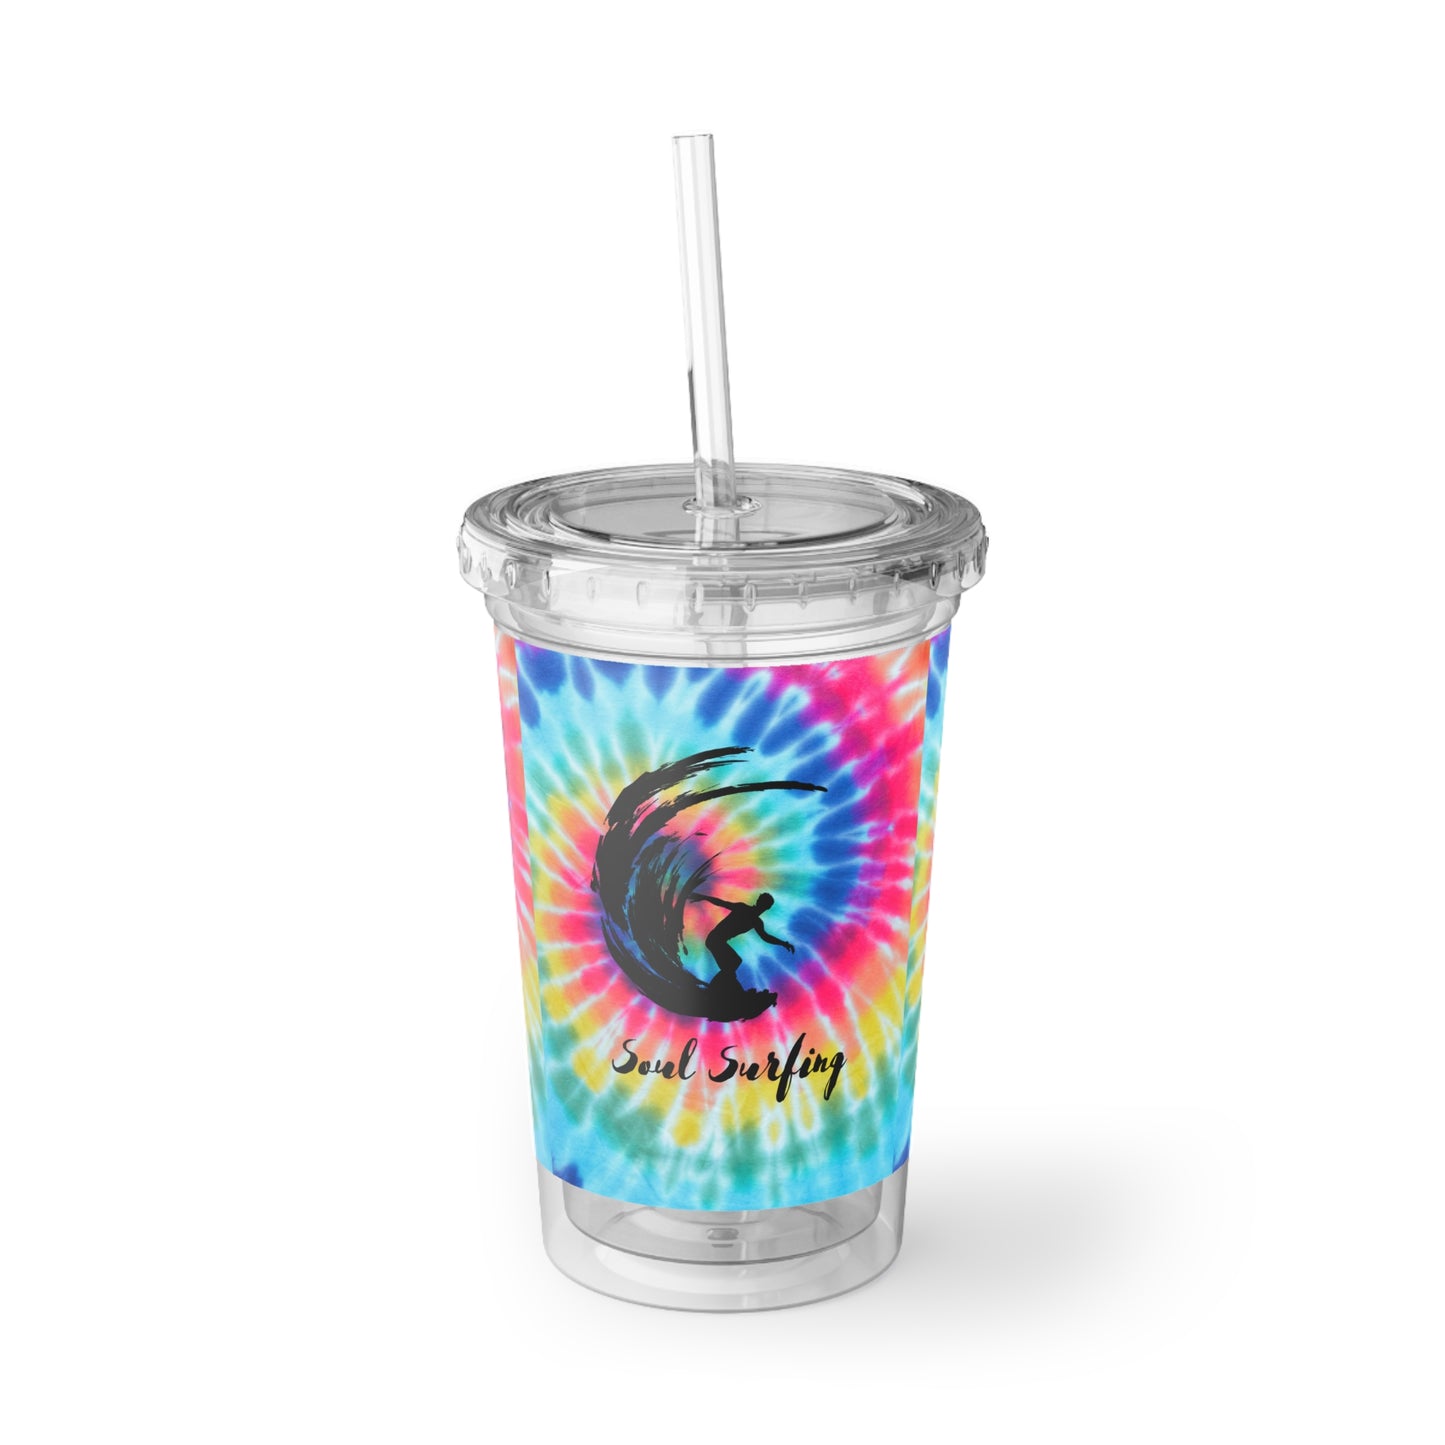 Soul Surfing Tie Dye Surfing Hang Ten 1970s Cold Beverage Suave Acrylic Cup